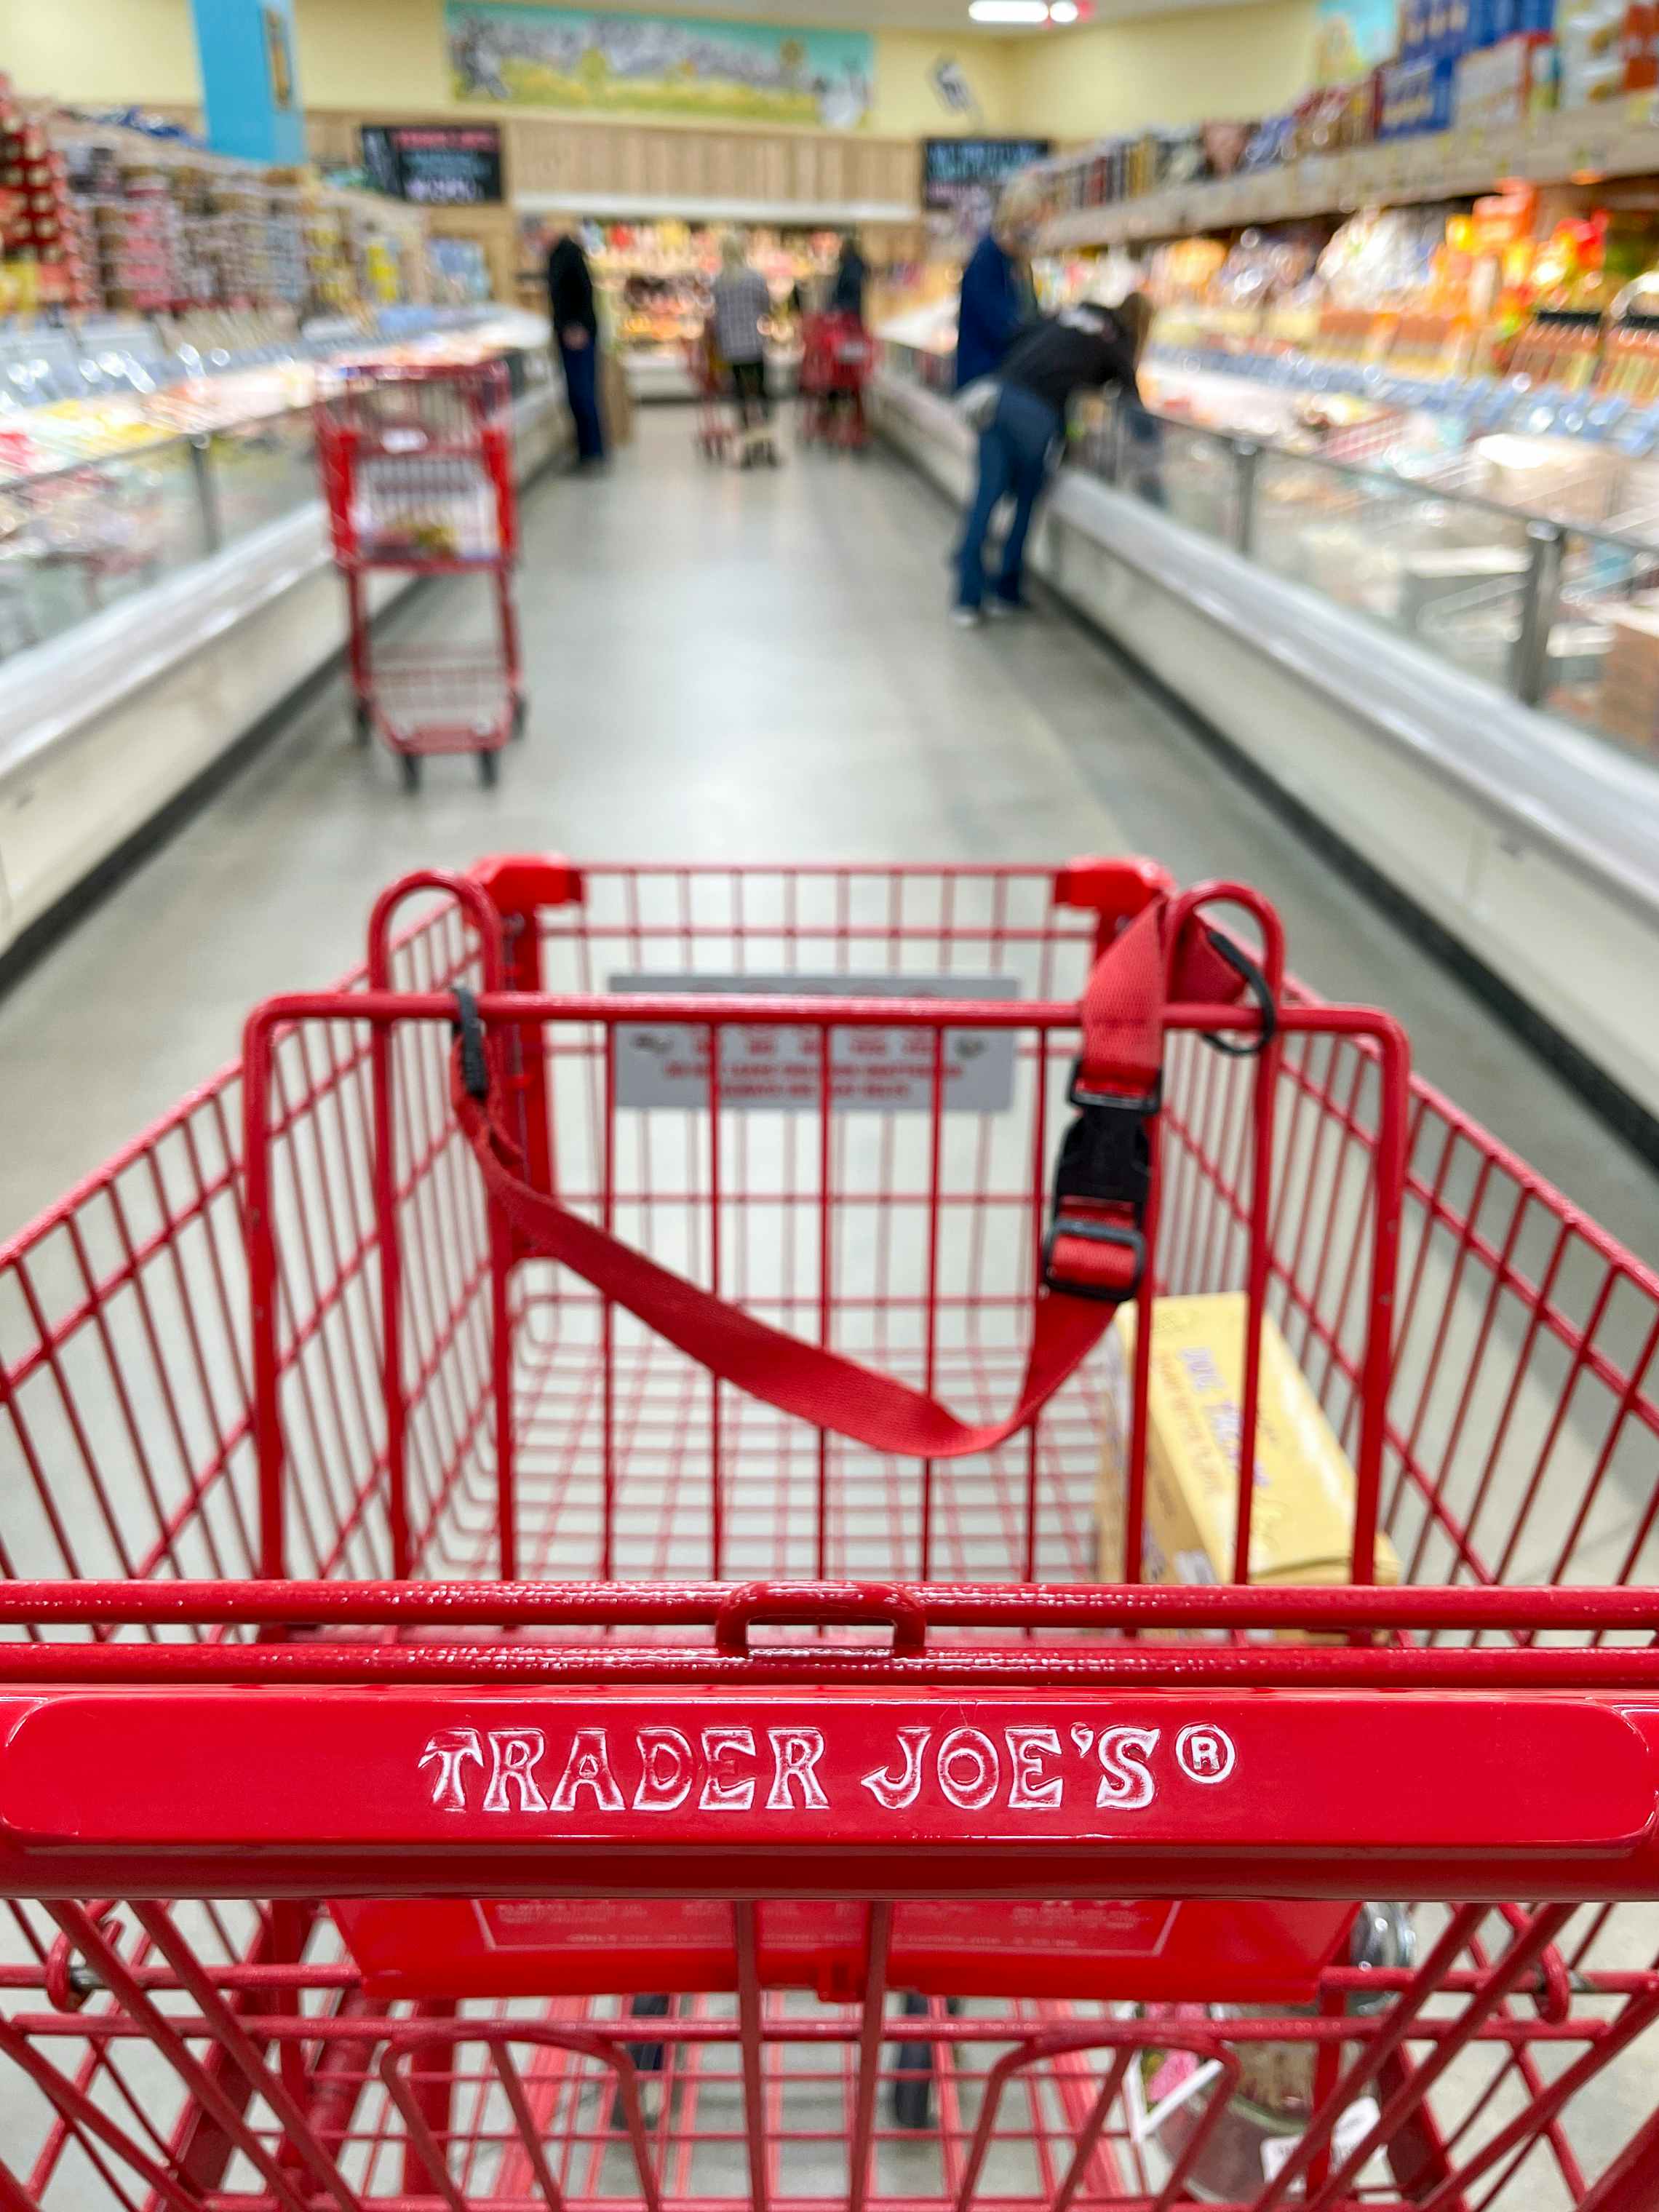 A shopping cart in the center of an aisle at Trader Joe's